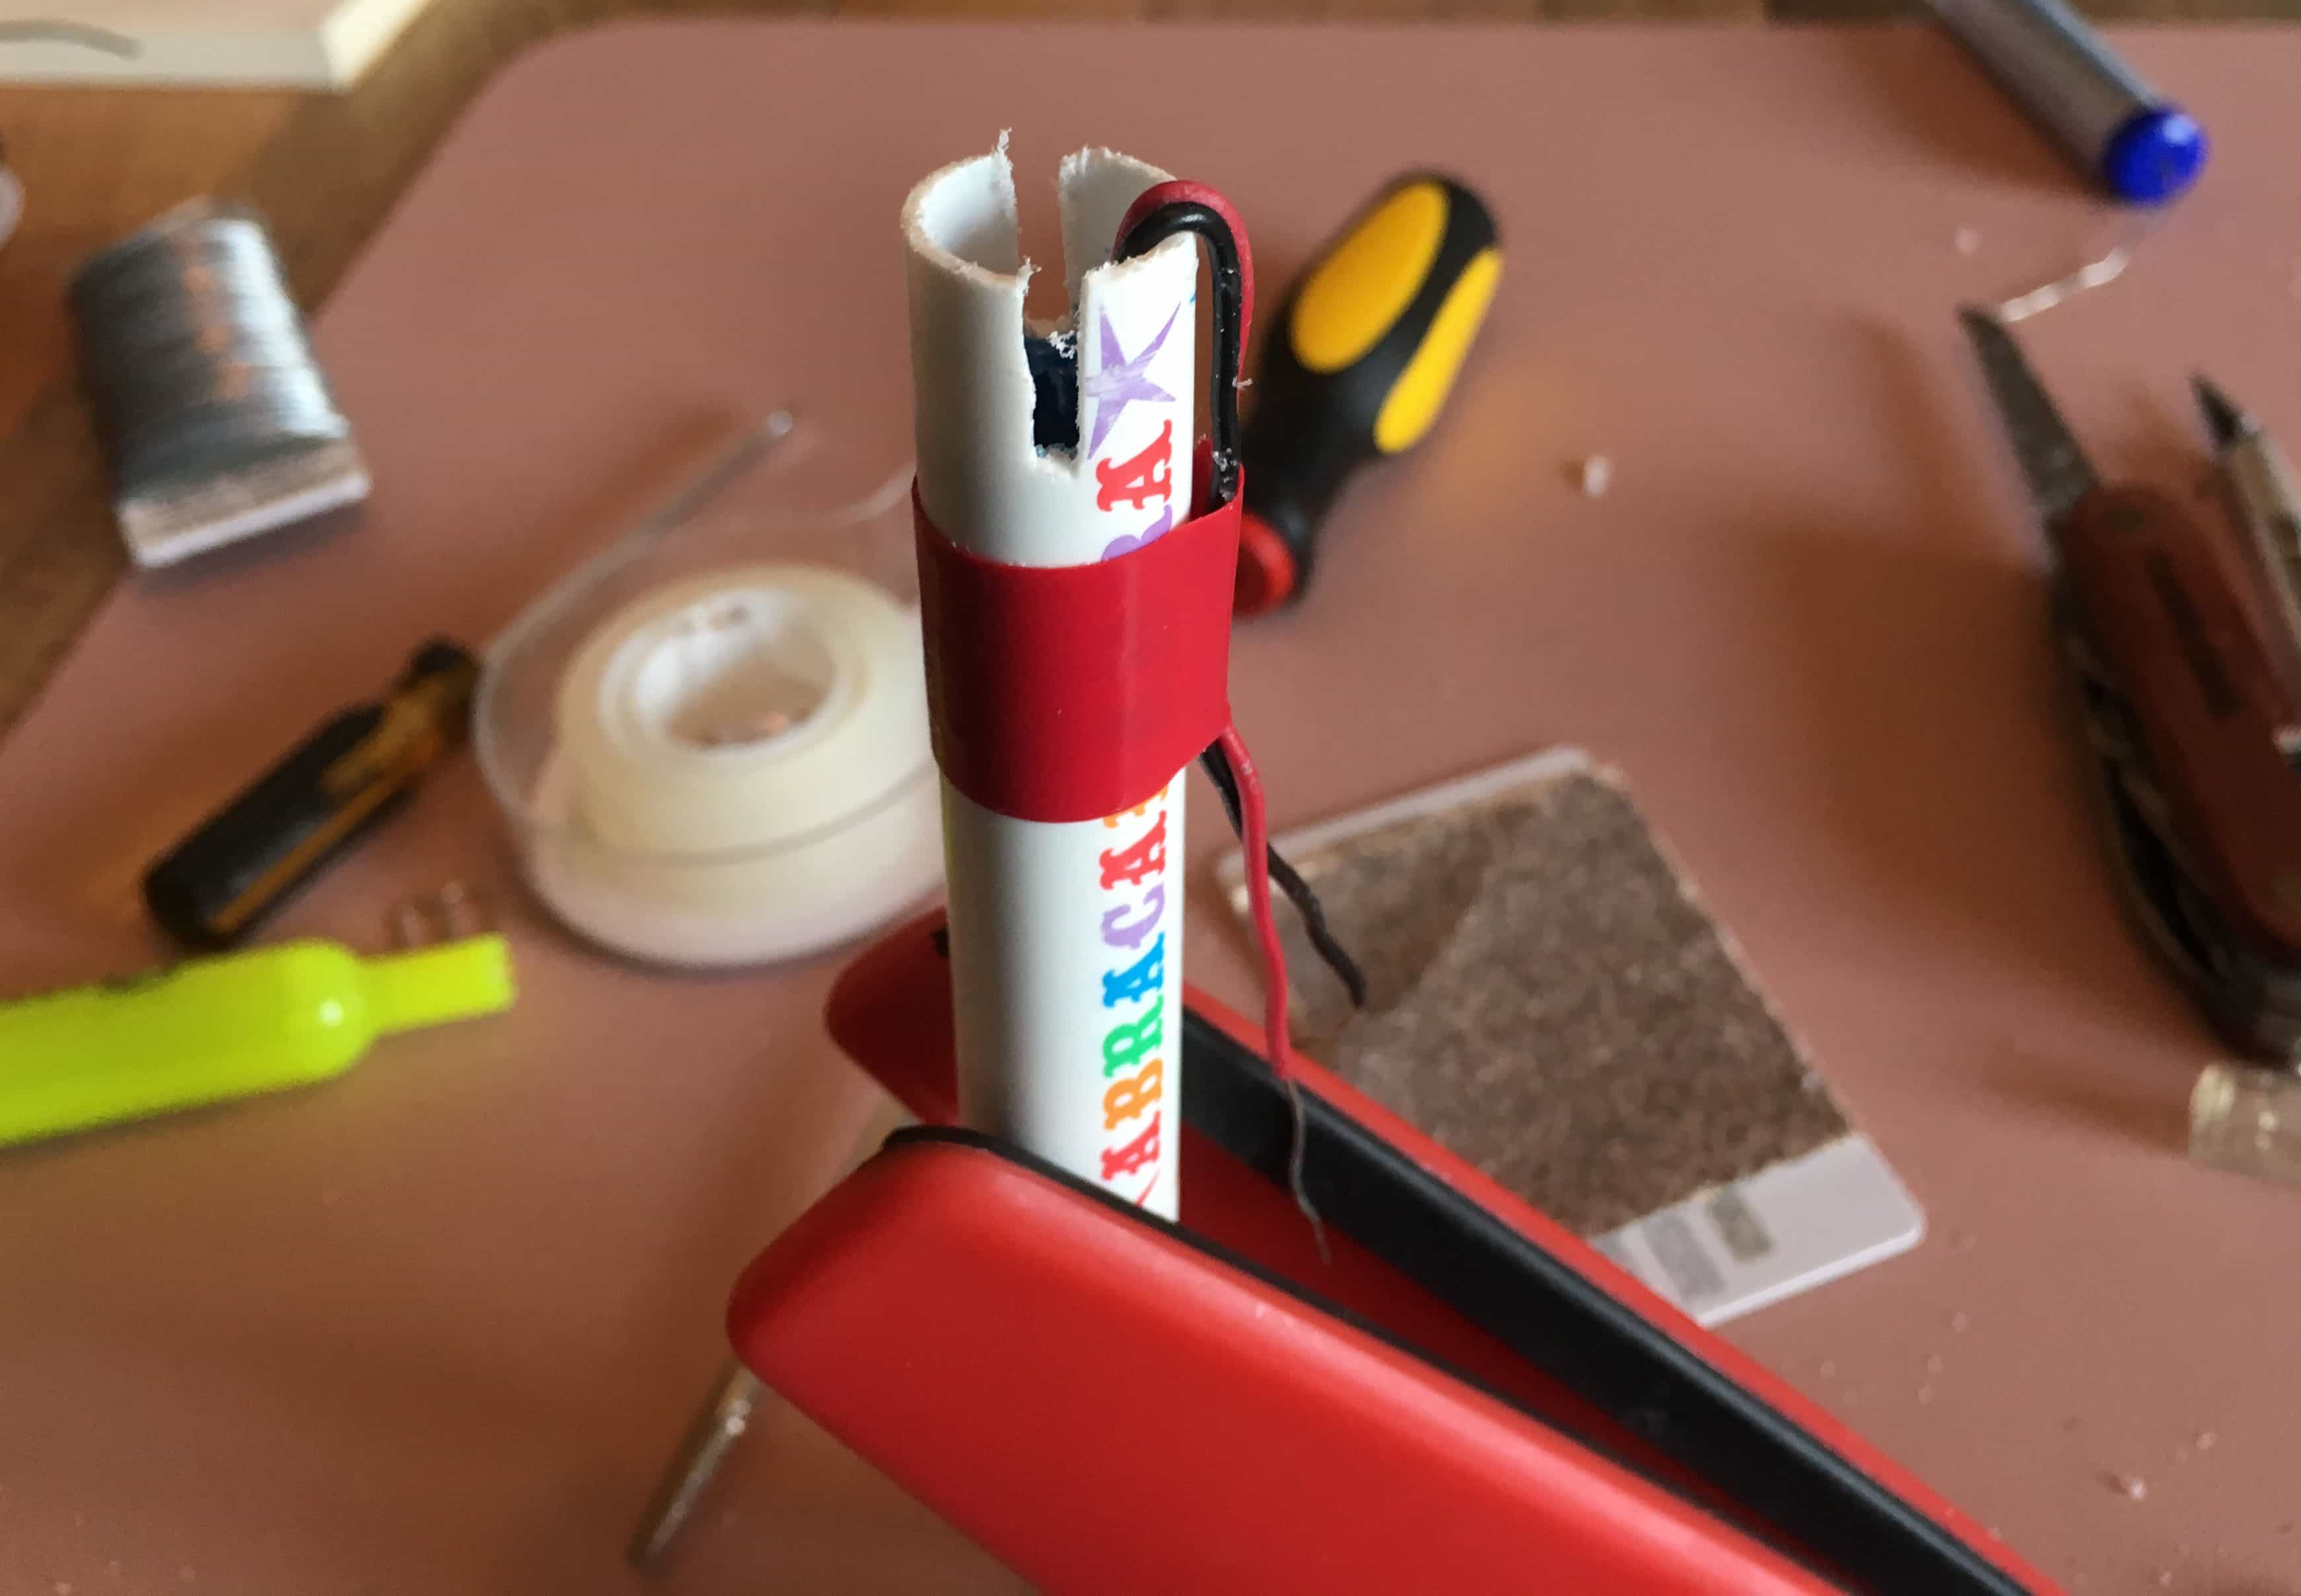 Marker tube with cuts in its base.